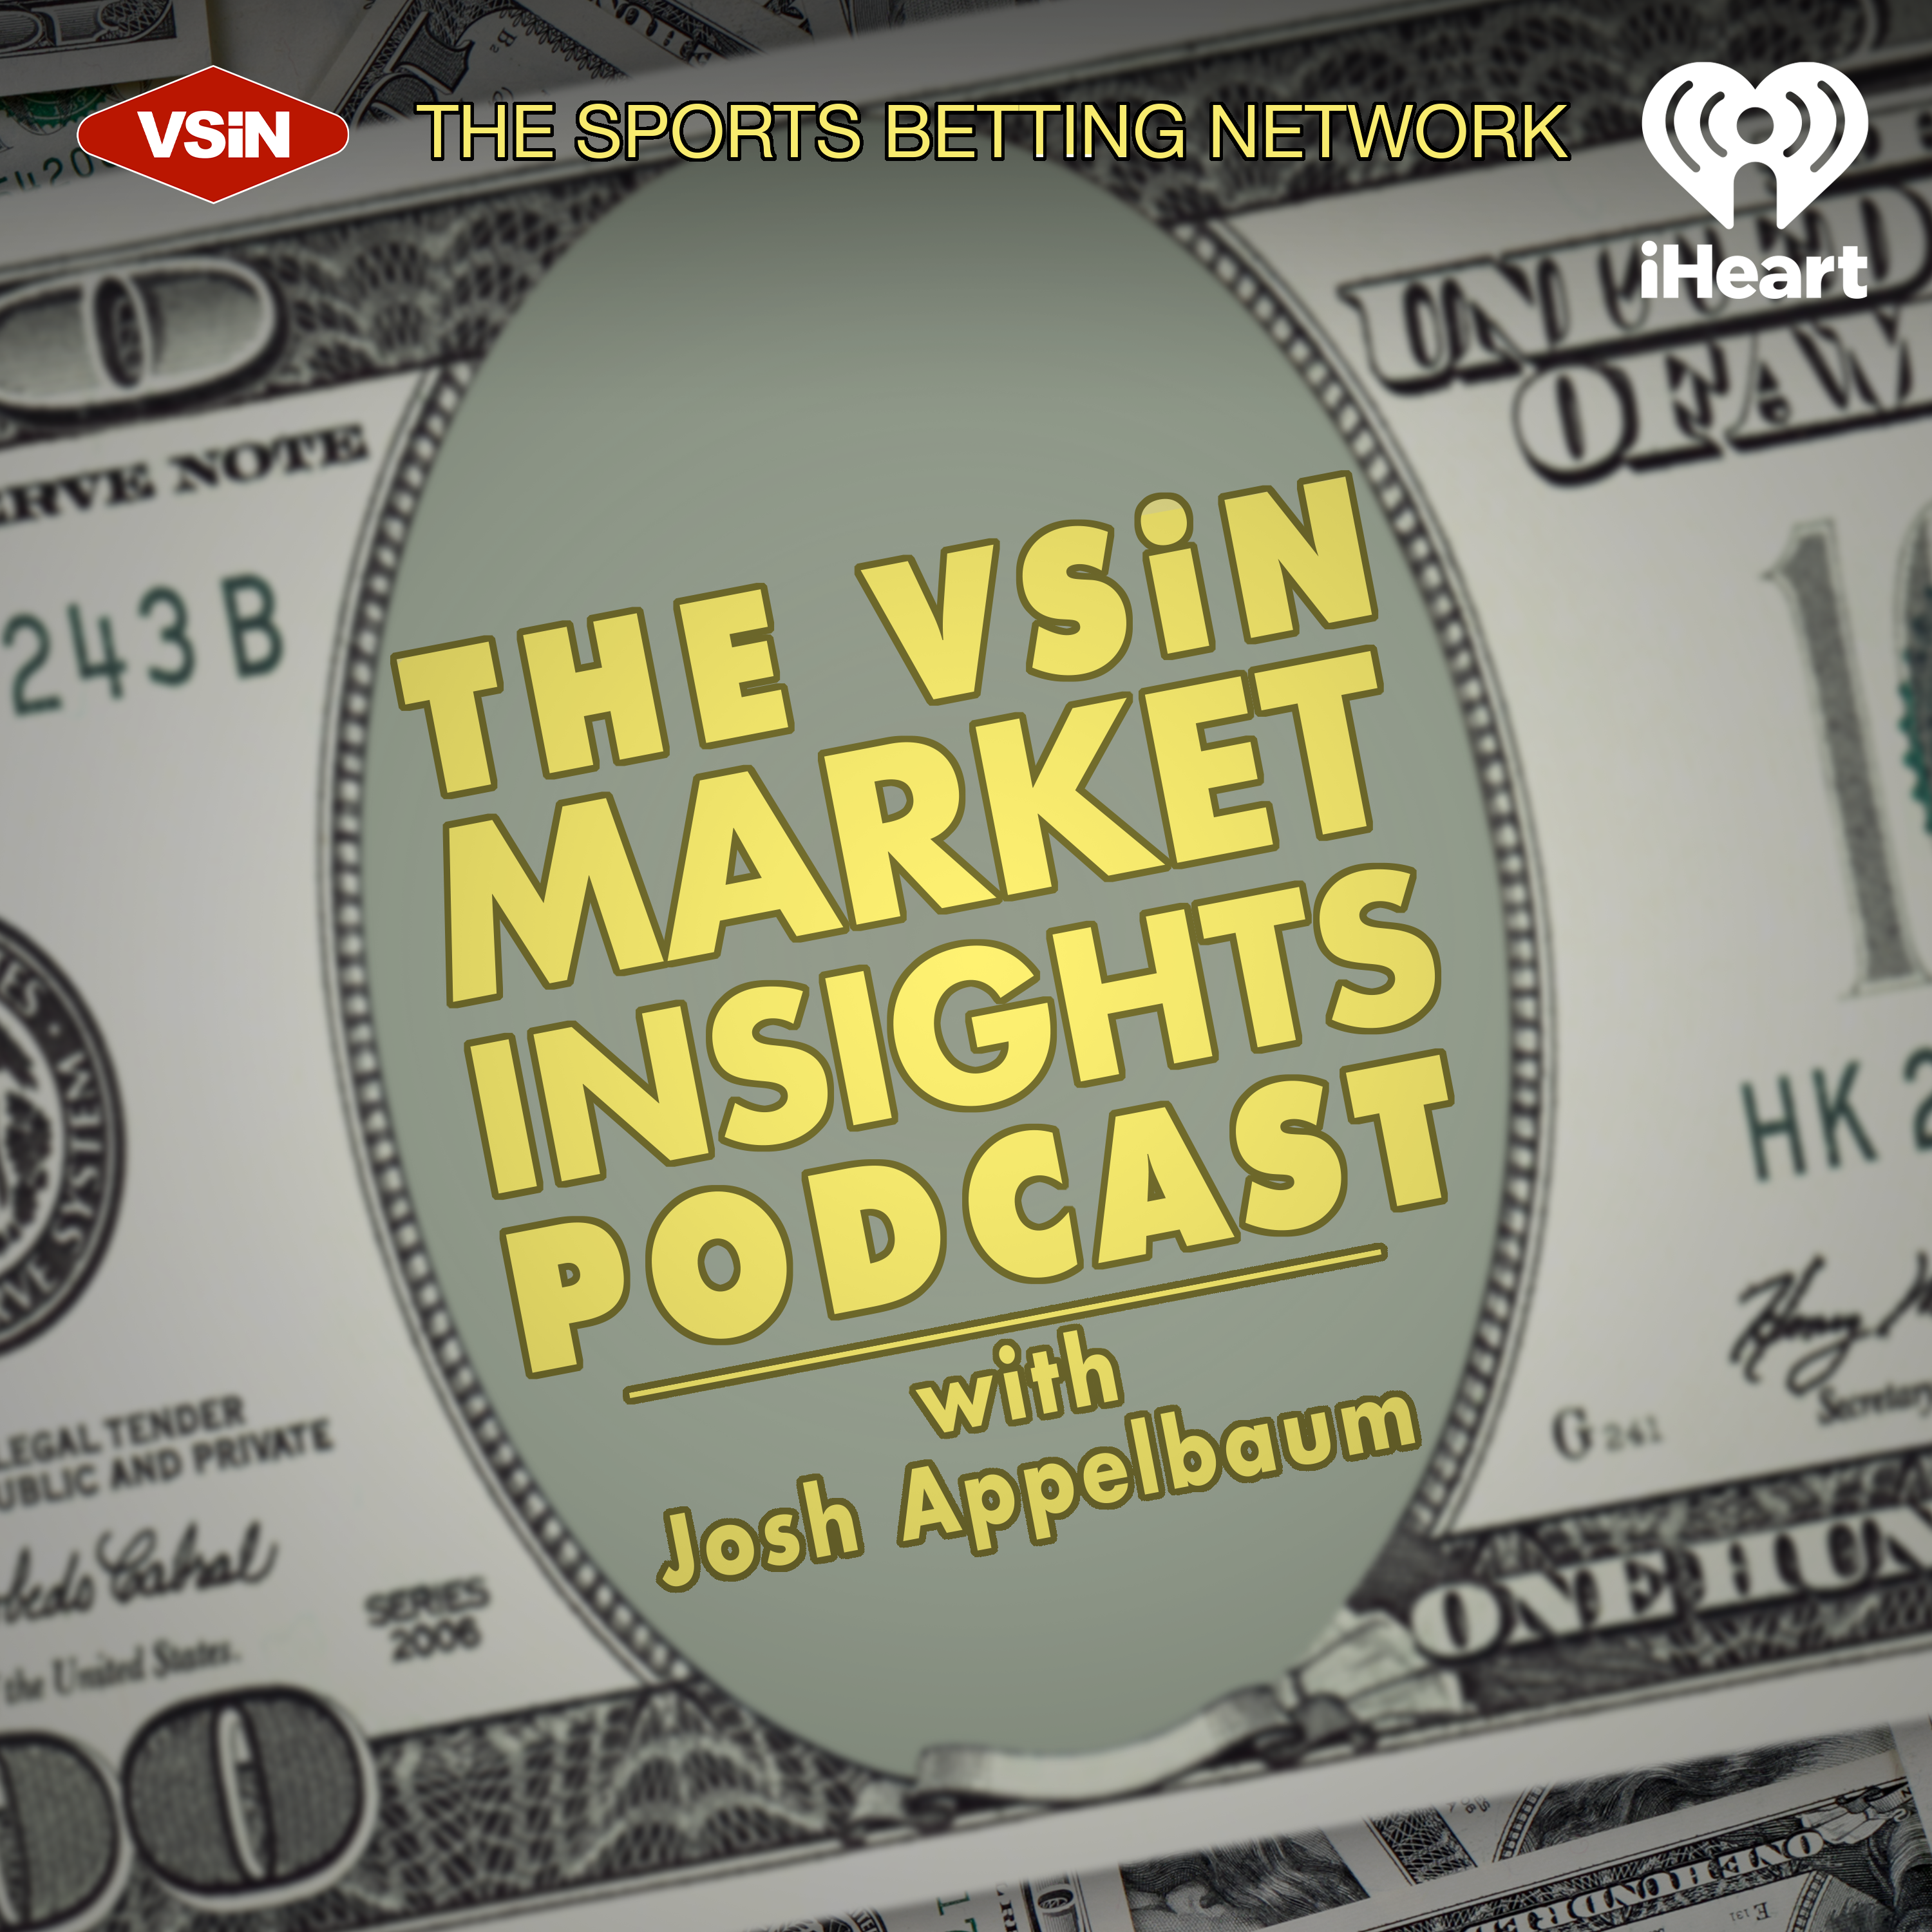 The VSiN Market Insights Podcast with Josh Appelbaum | April 6, 2022